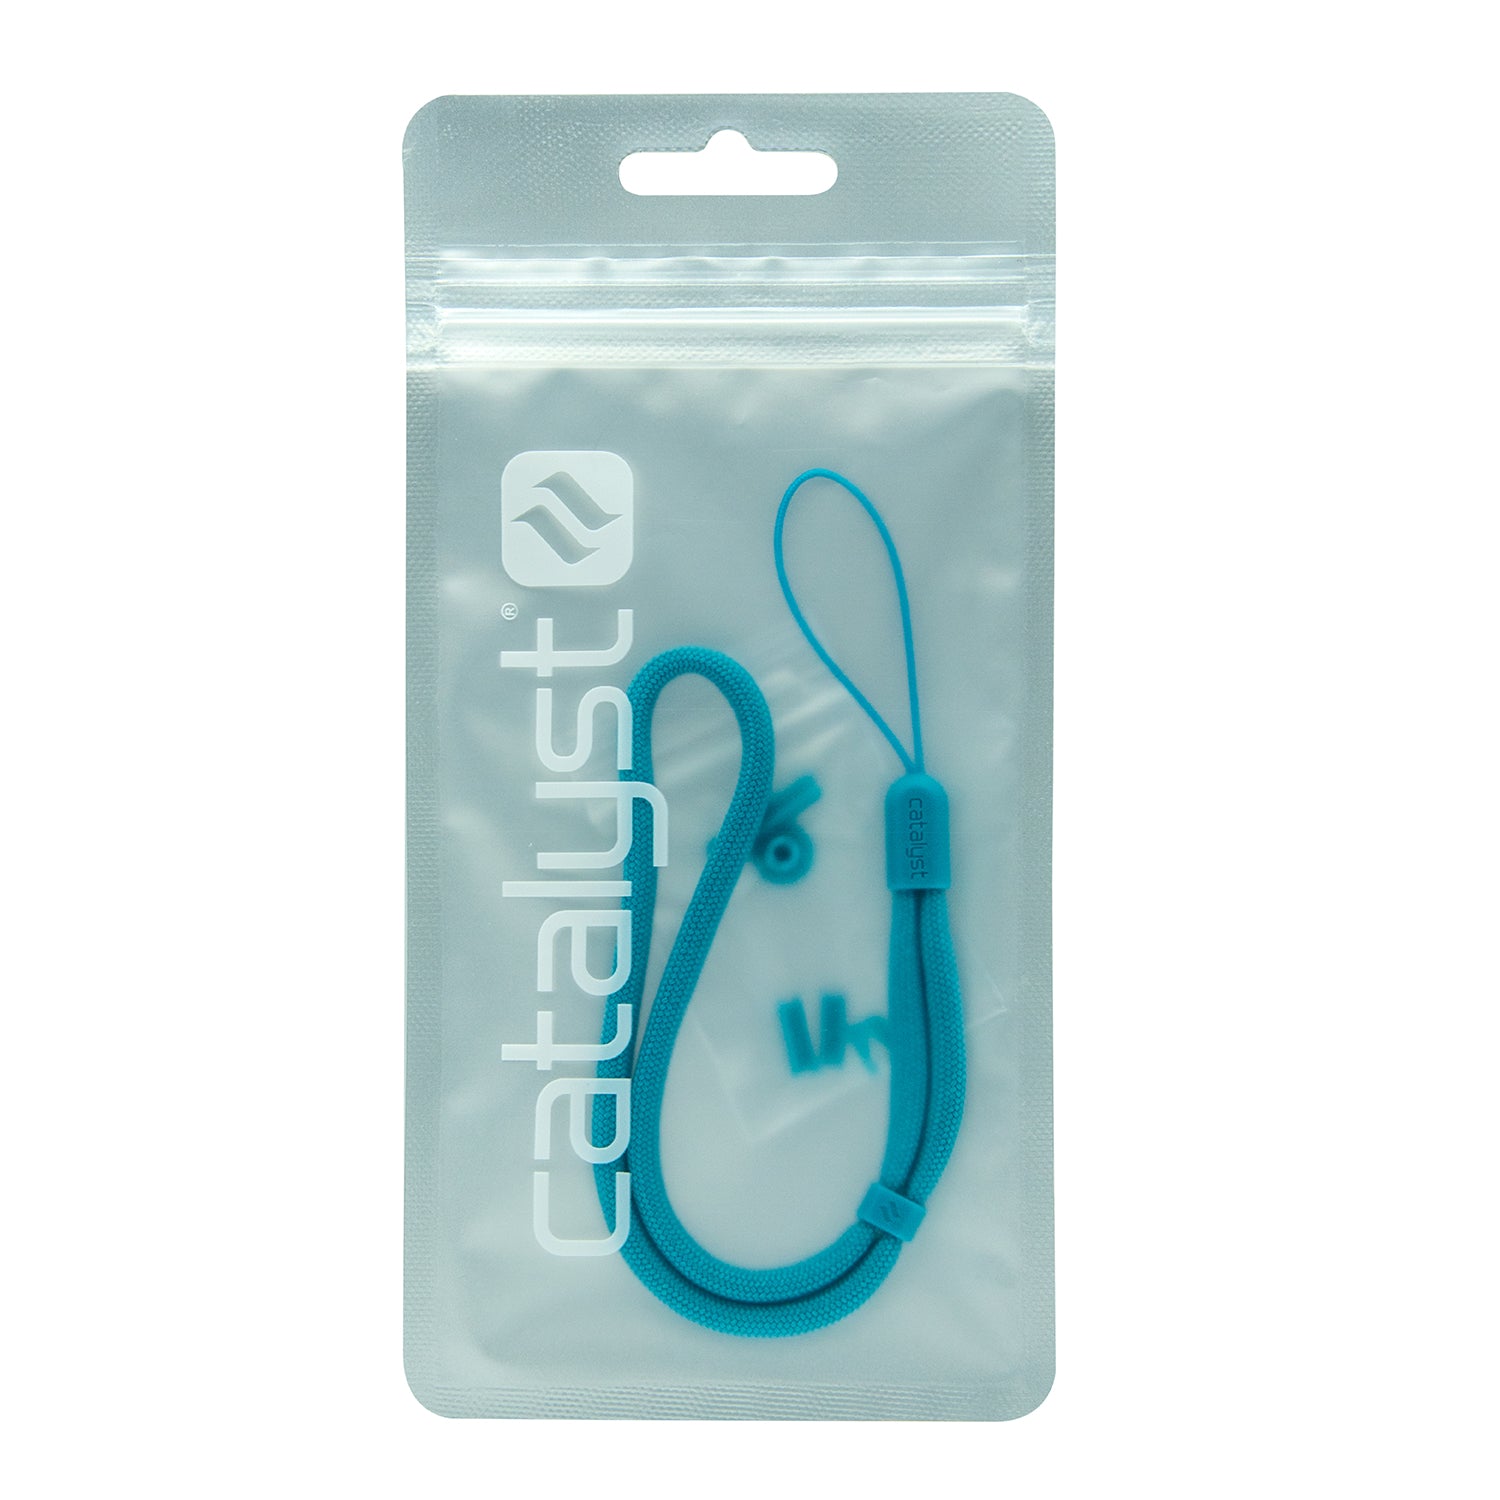 catalyst colored lanyard & buttons bondi blue inside the packaging